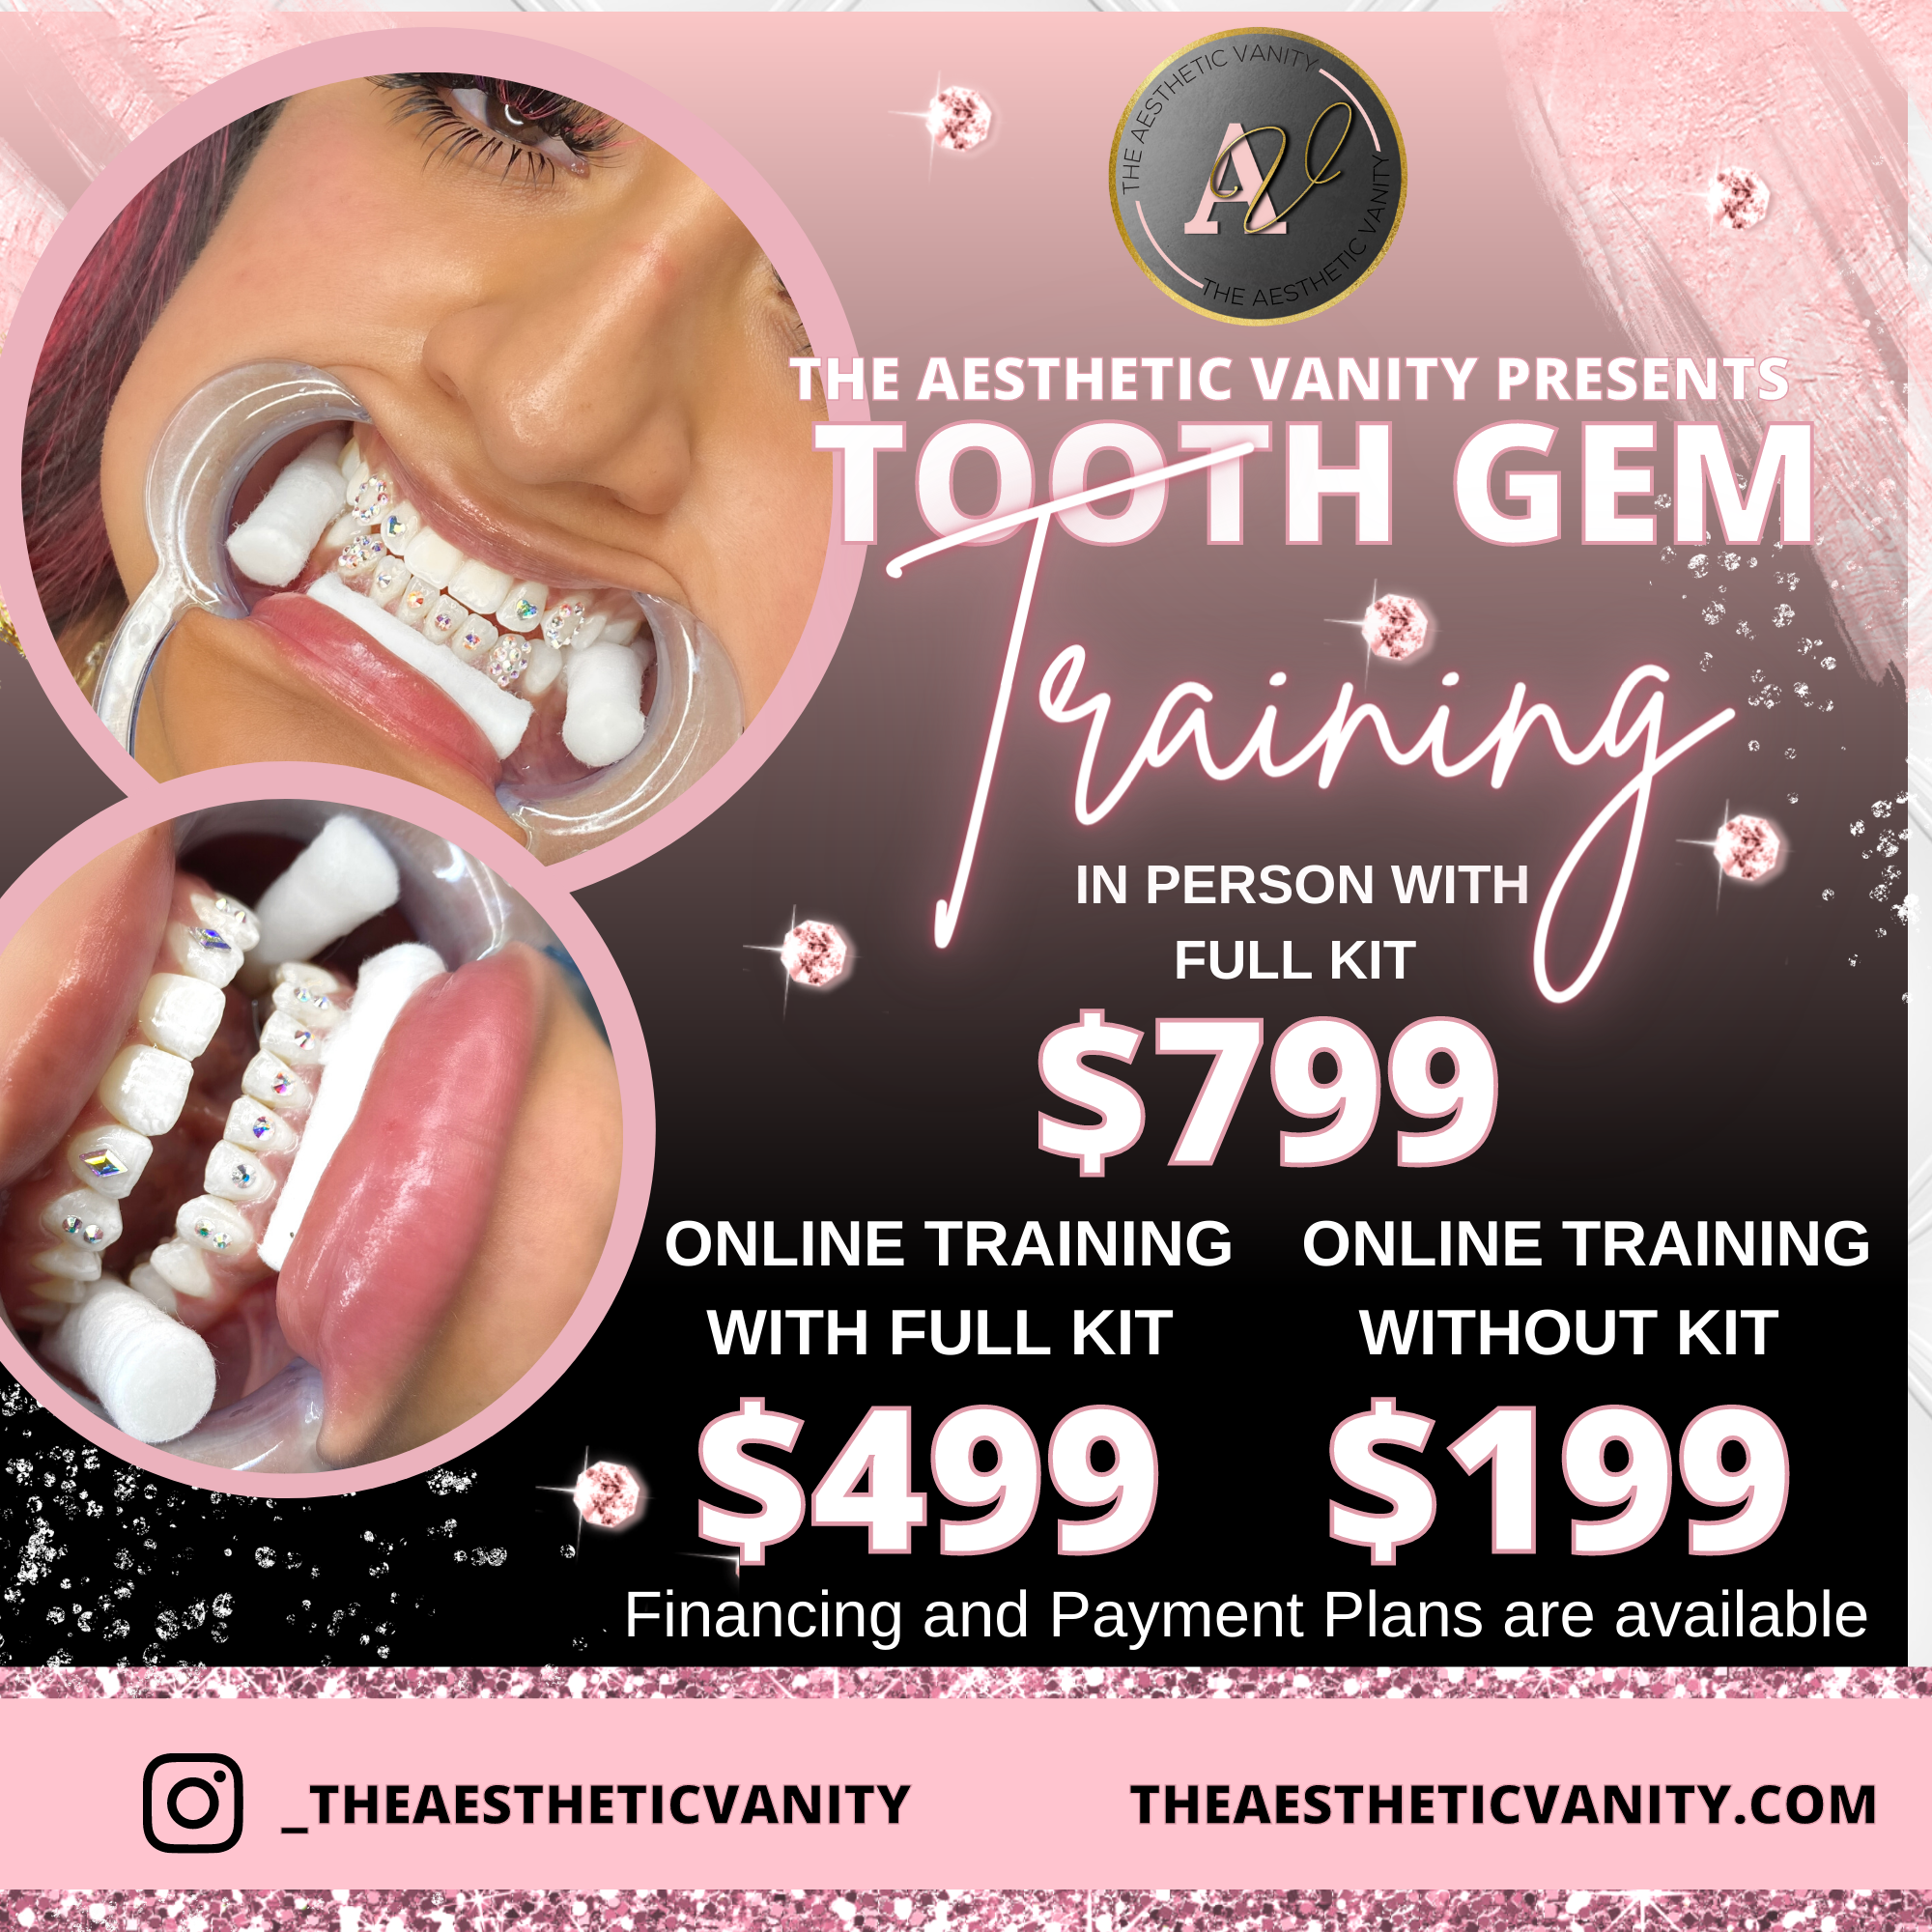 Tooth Gems – - Teeth Whitening Products that Work!